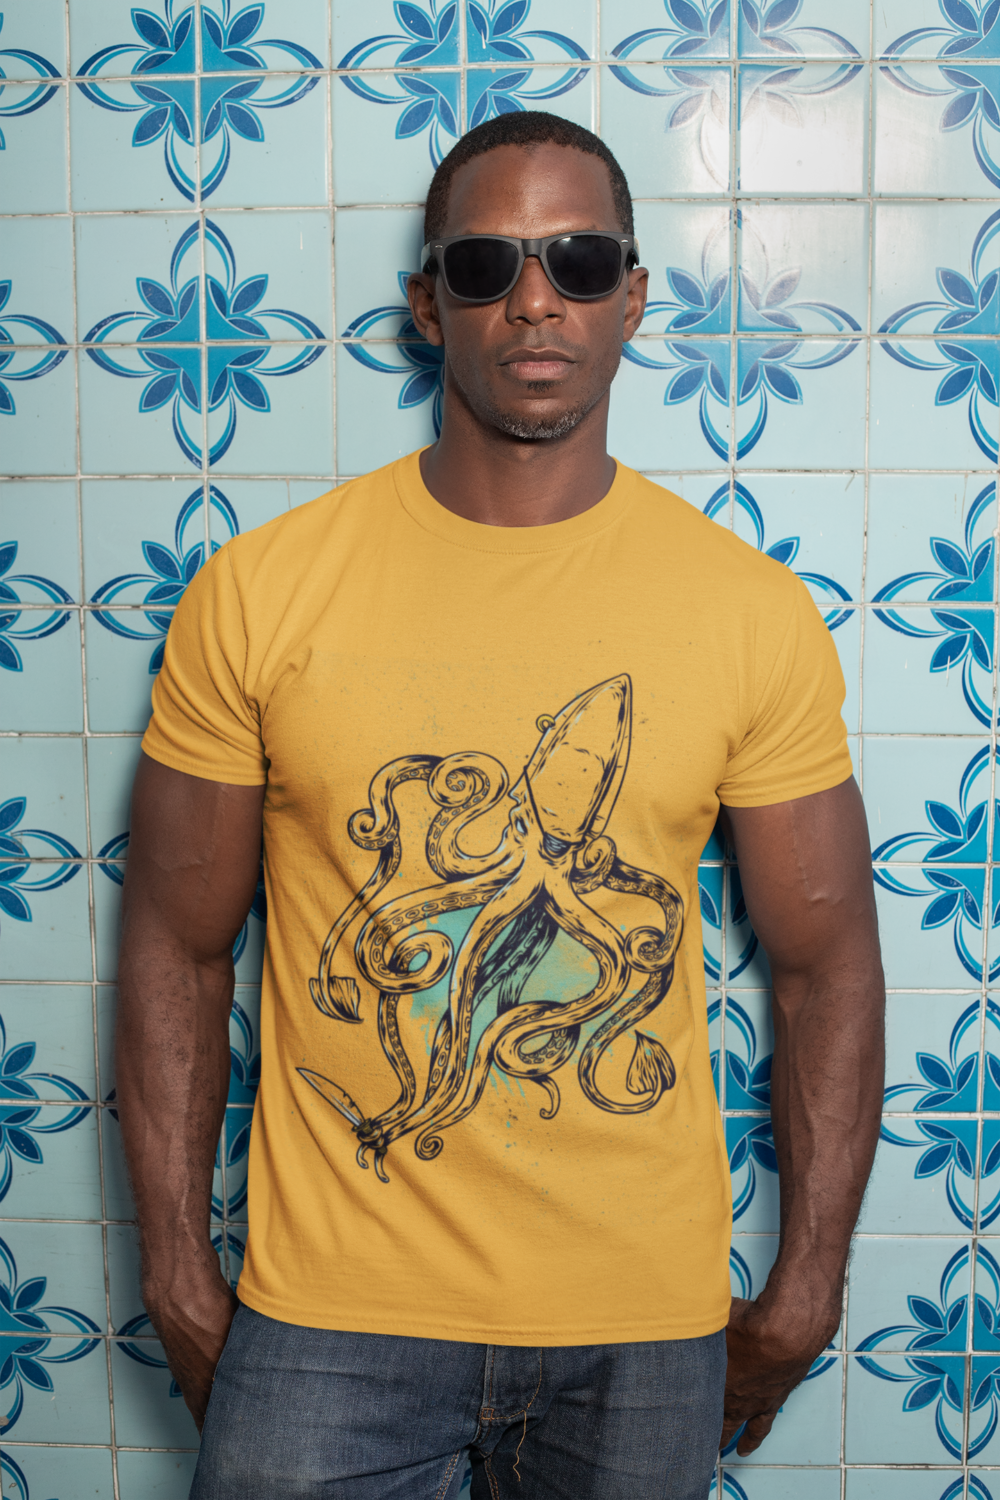 t shirt mockup of a man with sunglasses against a blue tiling 30449